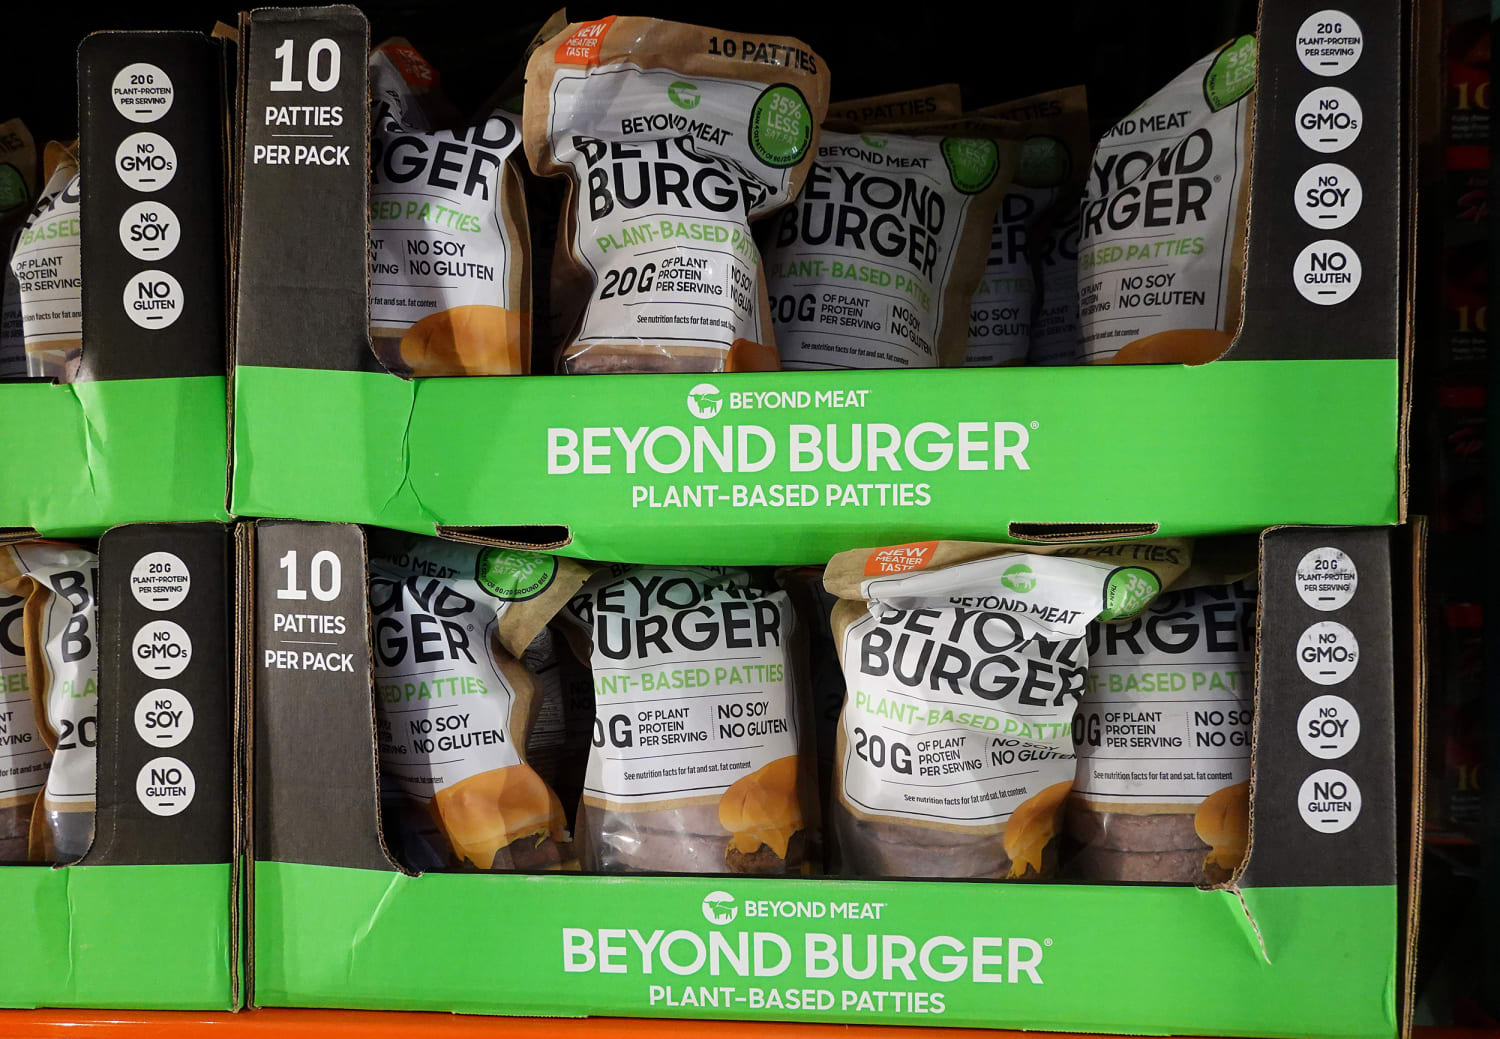 Class-action lawsuits alleging deceptive practices by Beyond Meat will be combined in Chicago